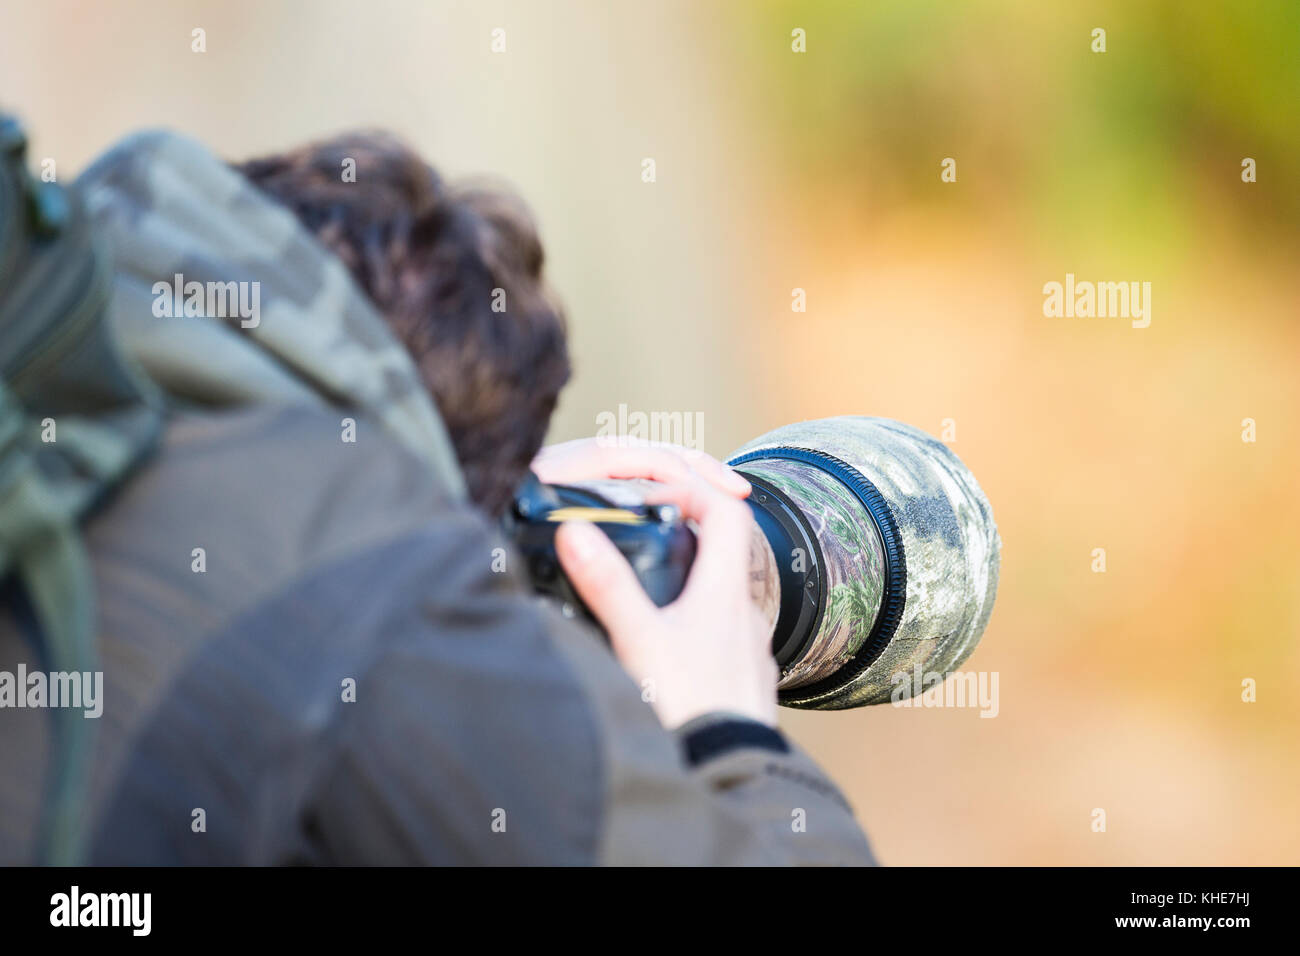 Richmond Park, London. A male photographer using a camera with a large camouflaged lens takes a photograph. Stock Photo